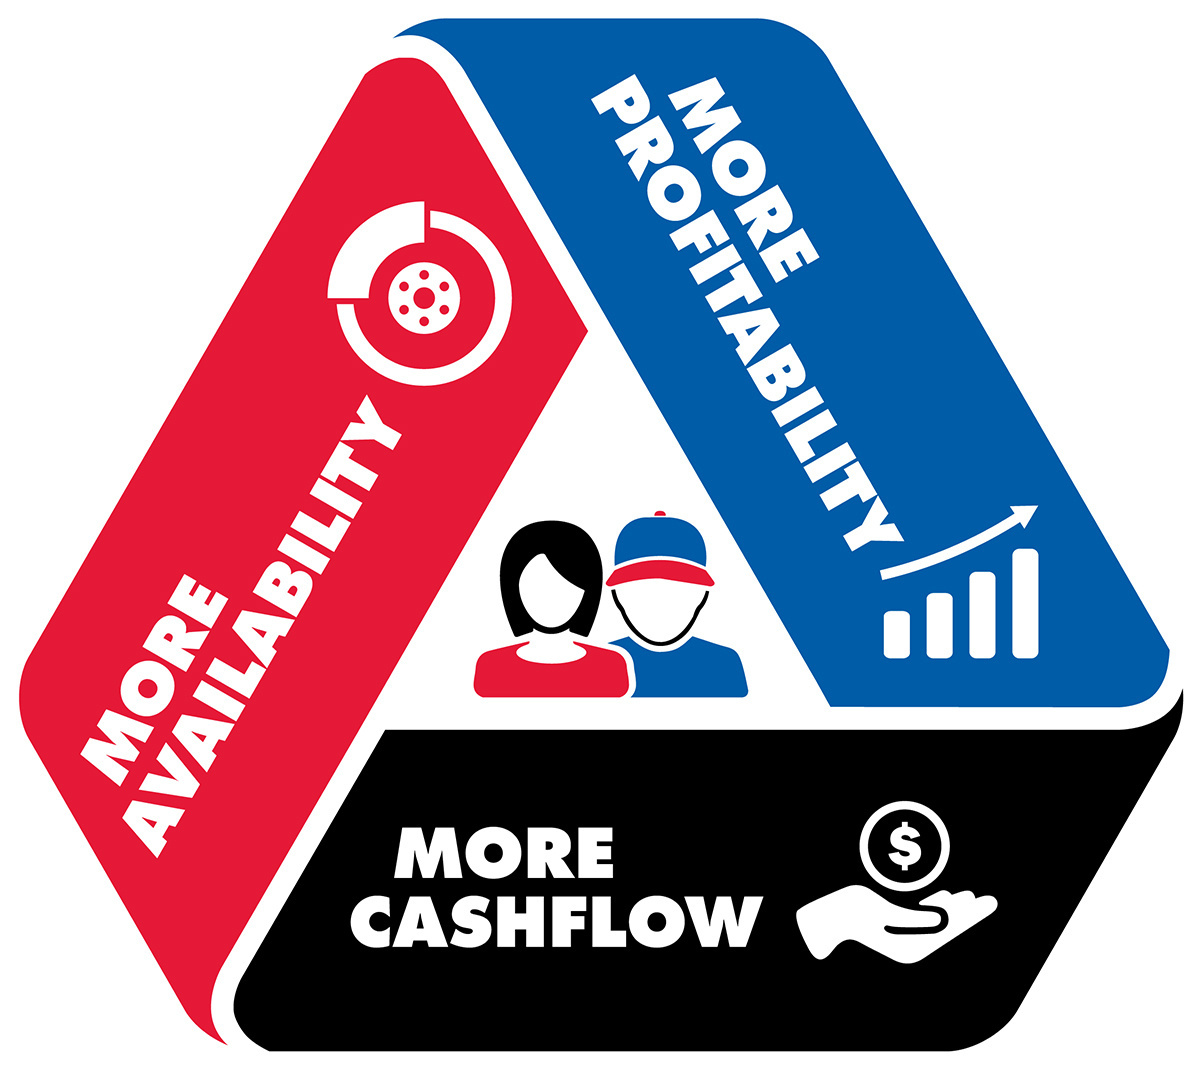 Carquest partners with you and invests in what matters most to you and your customers. We help you put your customers where they want to be.